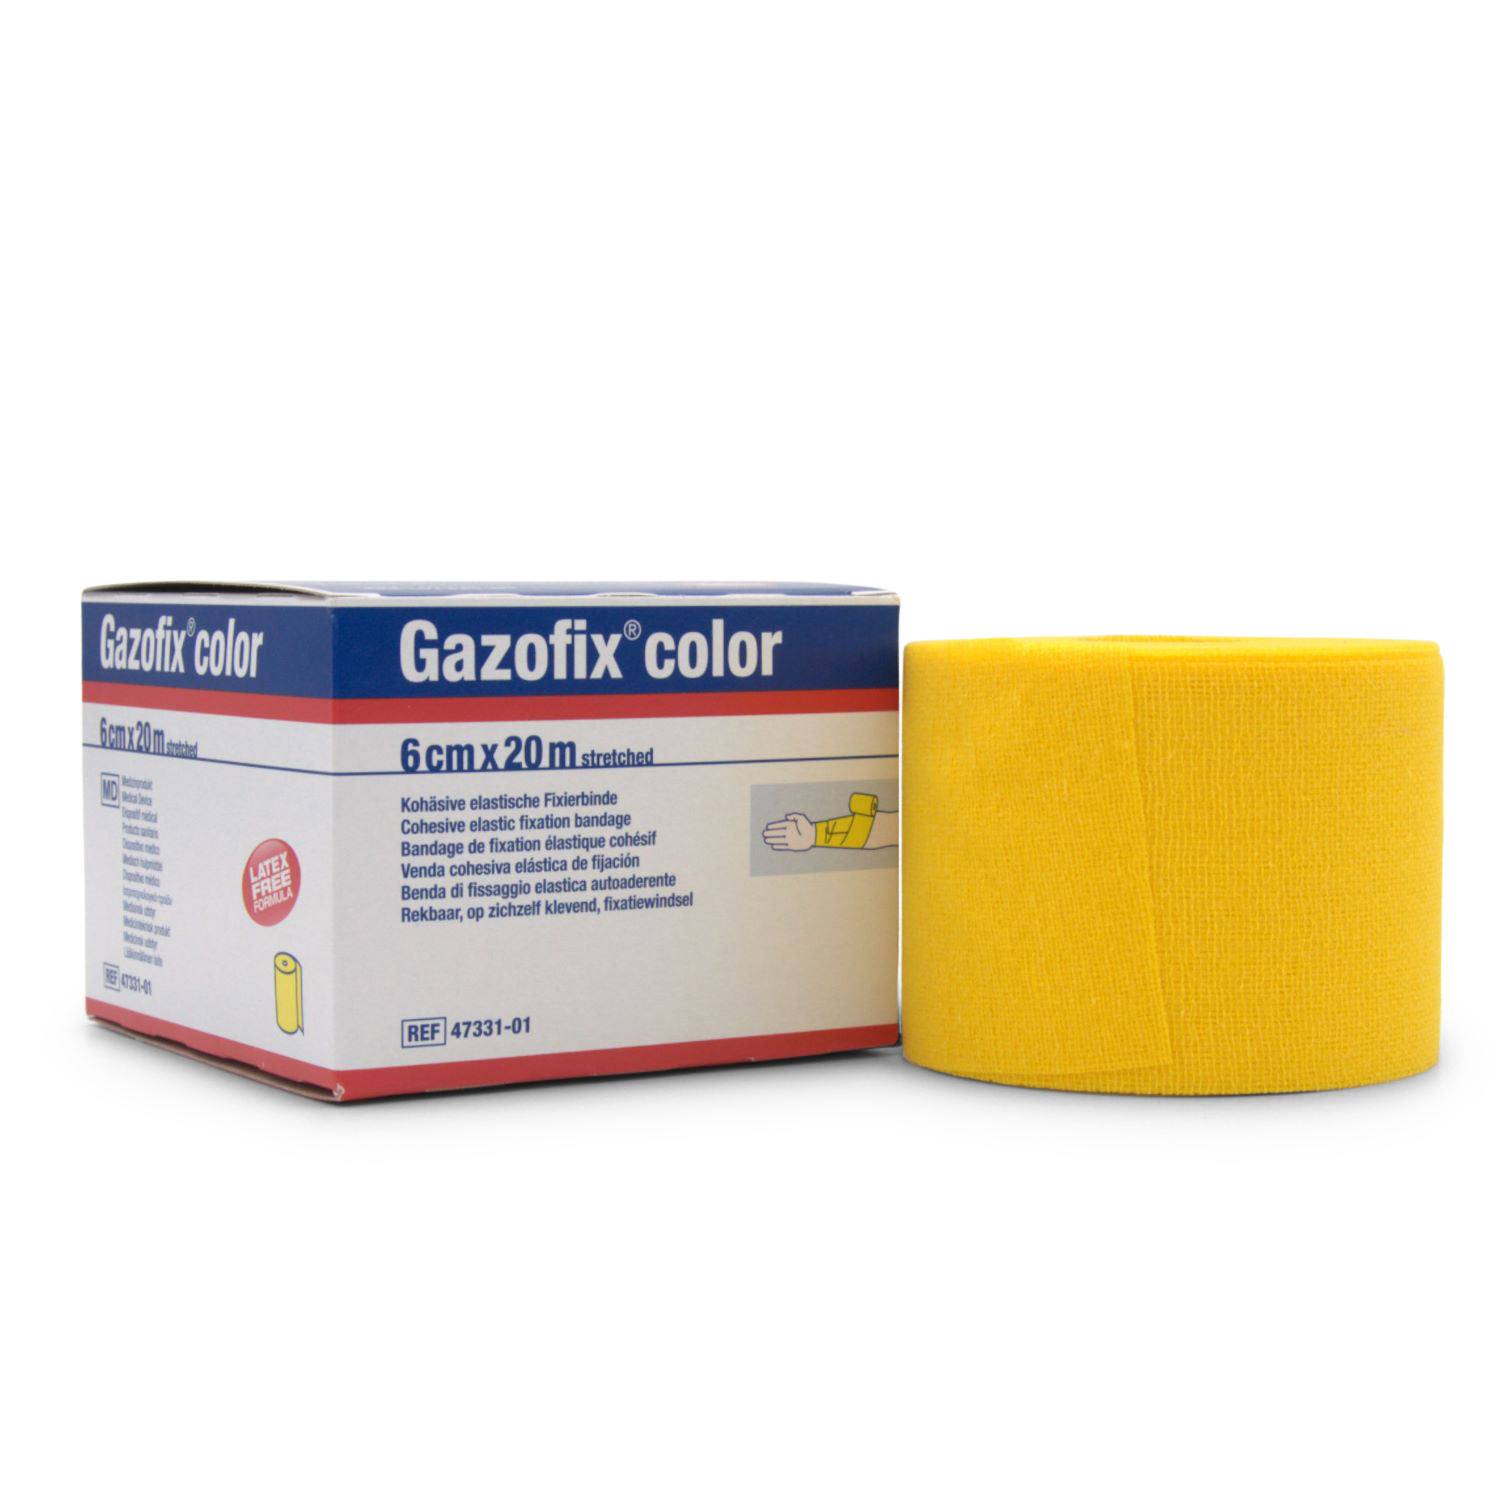 Gazofix® color Fixierbinde (20 m x 6 cm, gelb, selbsthaftend)